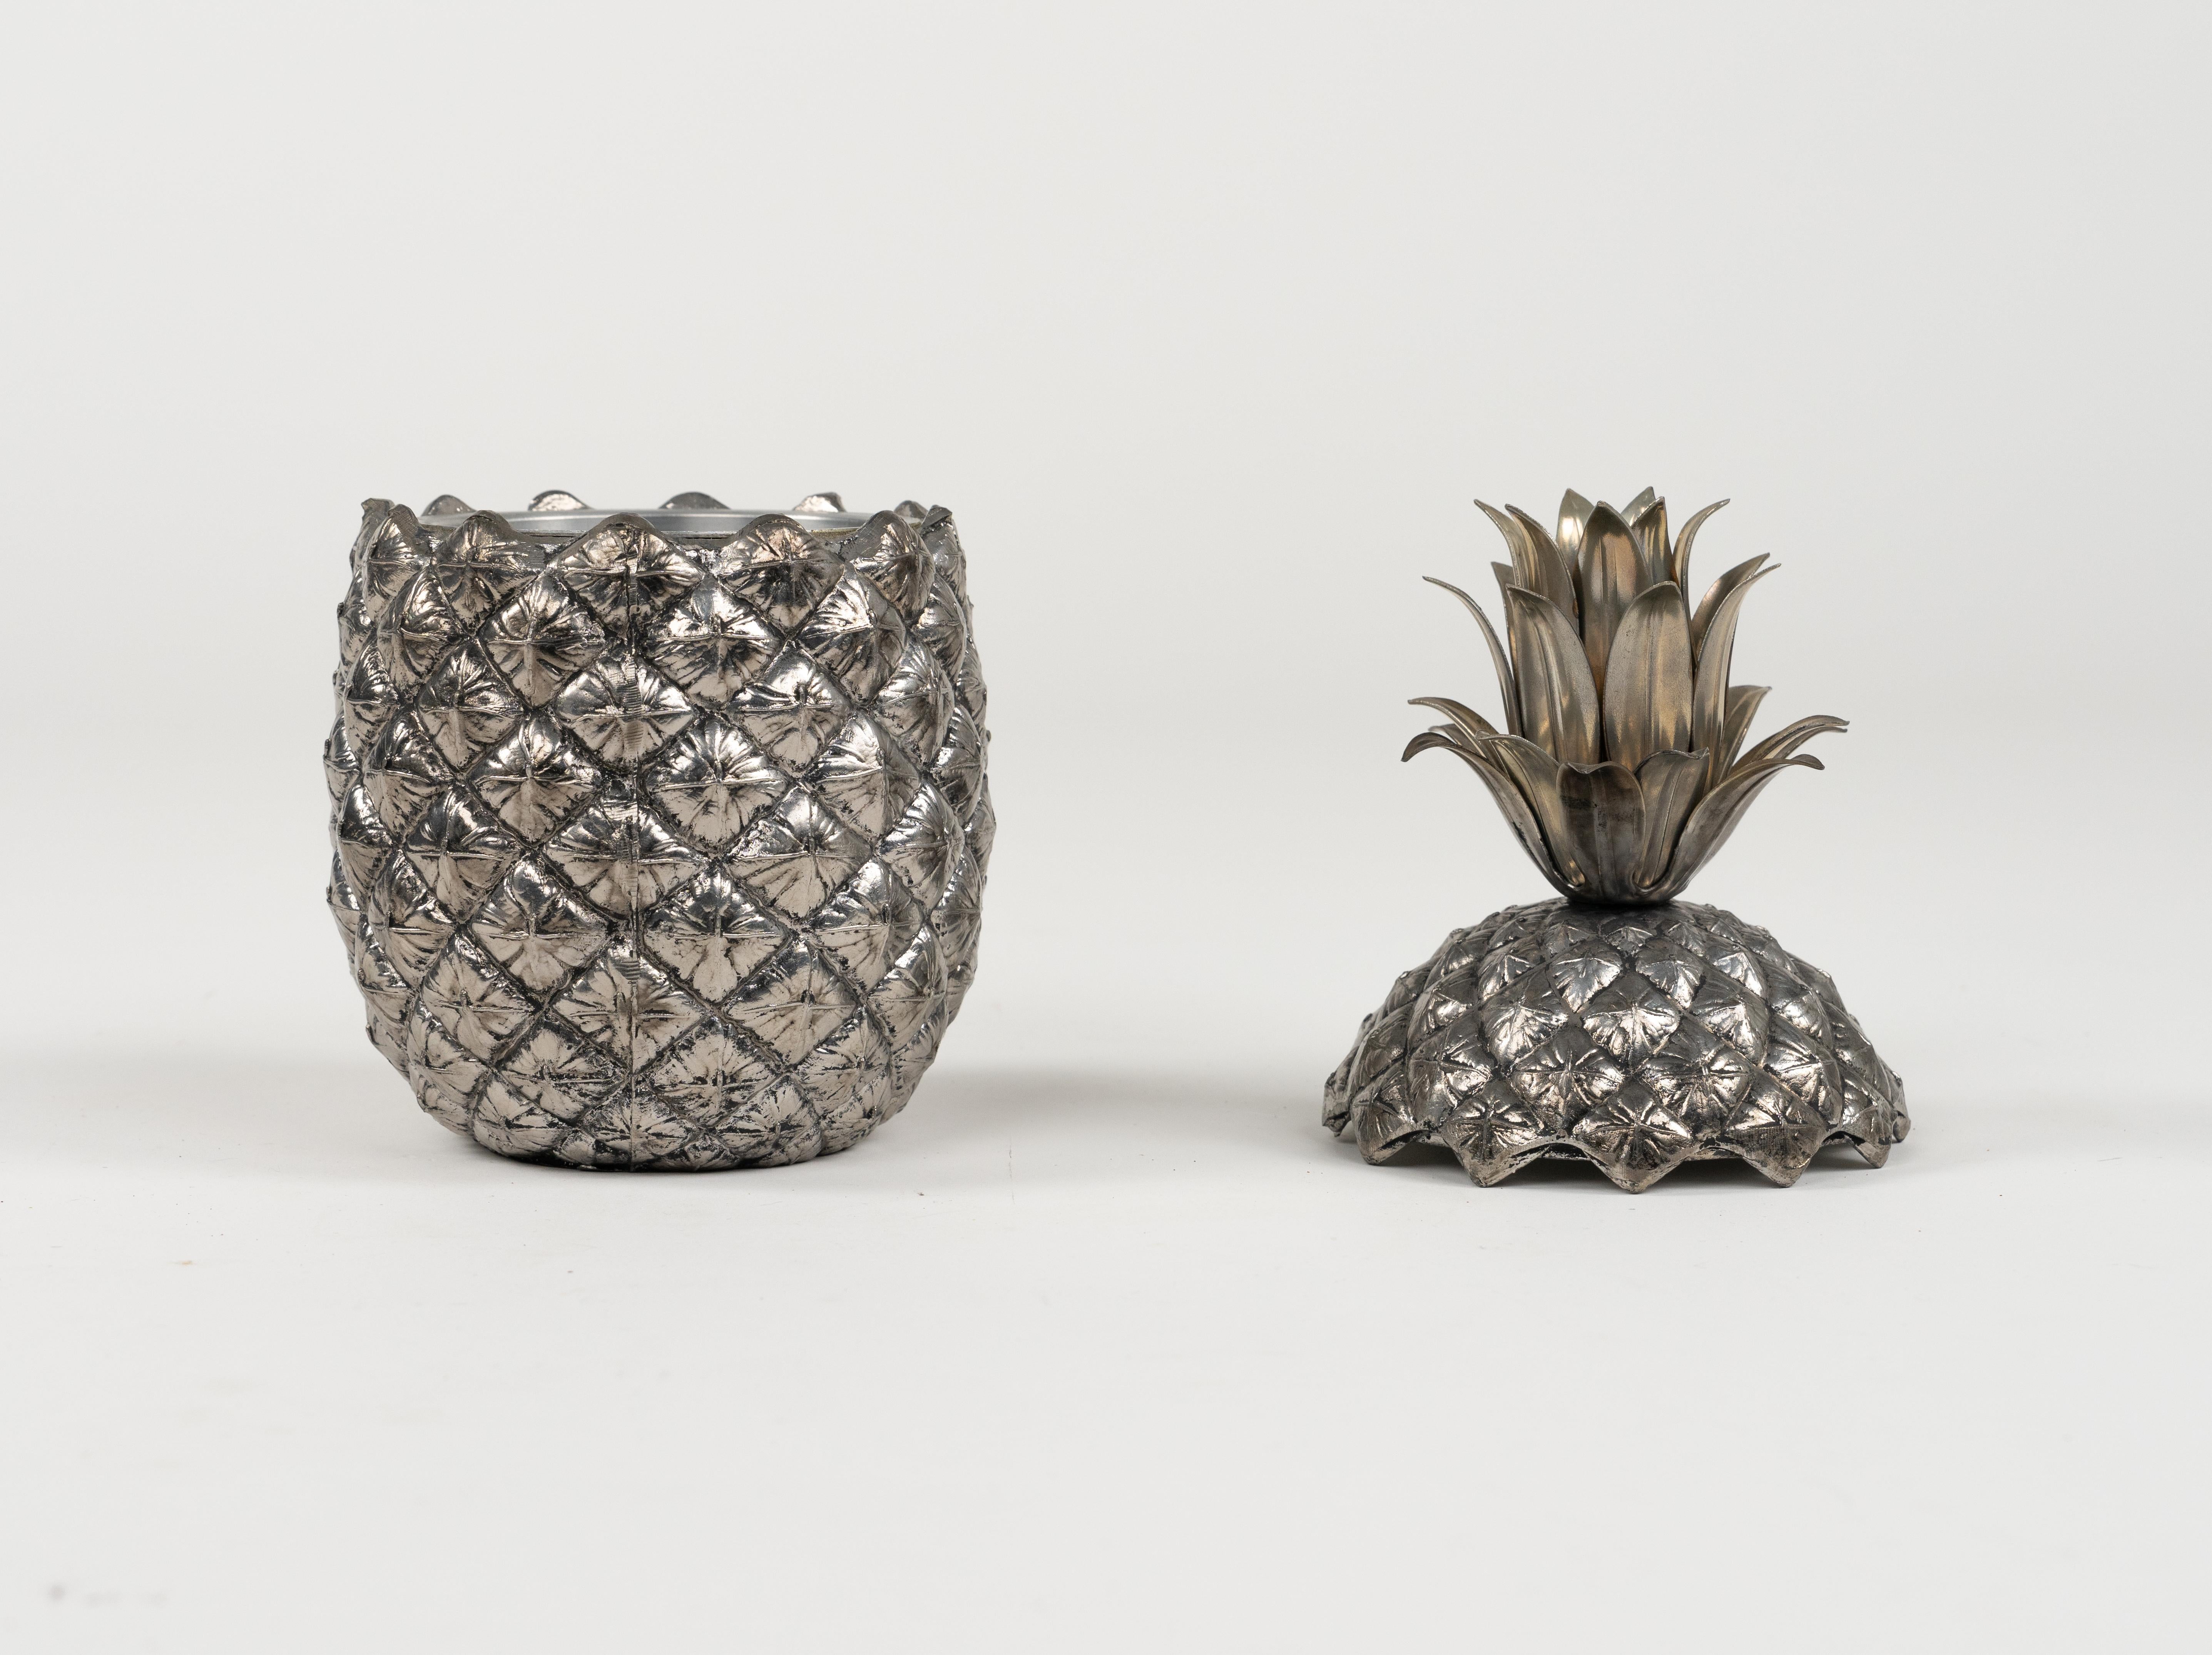 Midcentury Pewter Pineapple Form Ice Bucket by Mauro Manetti Italy, 1960s For Sale 5